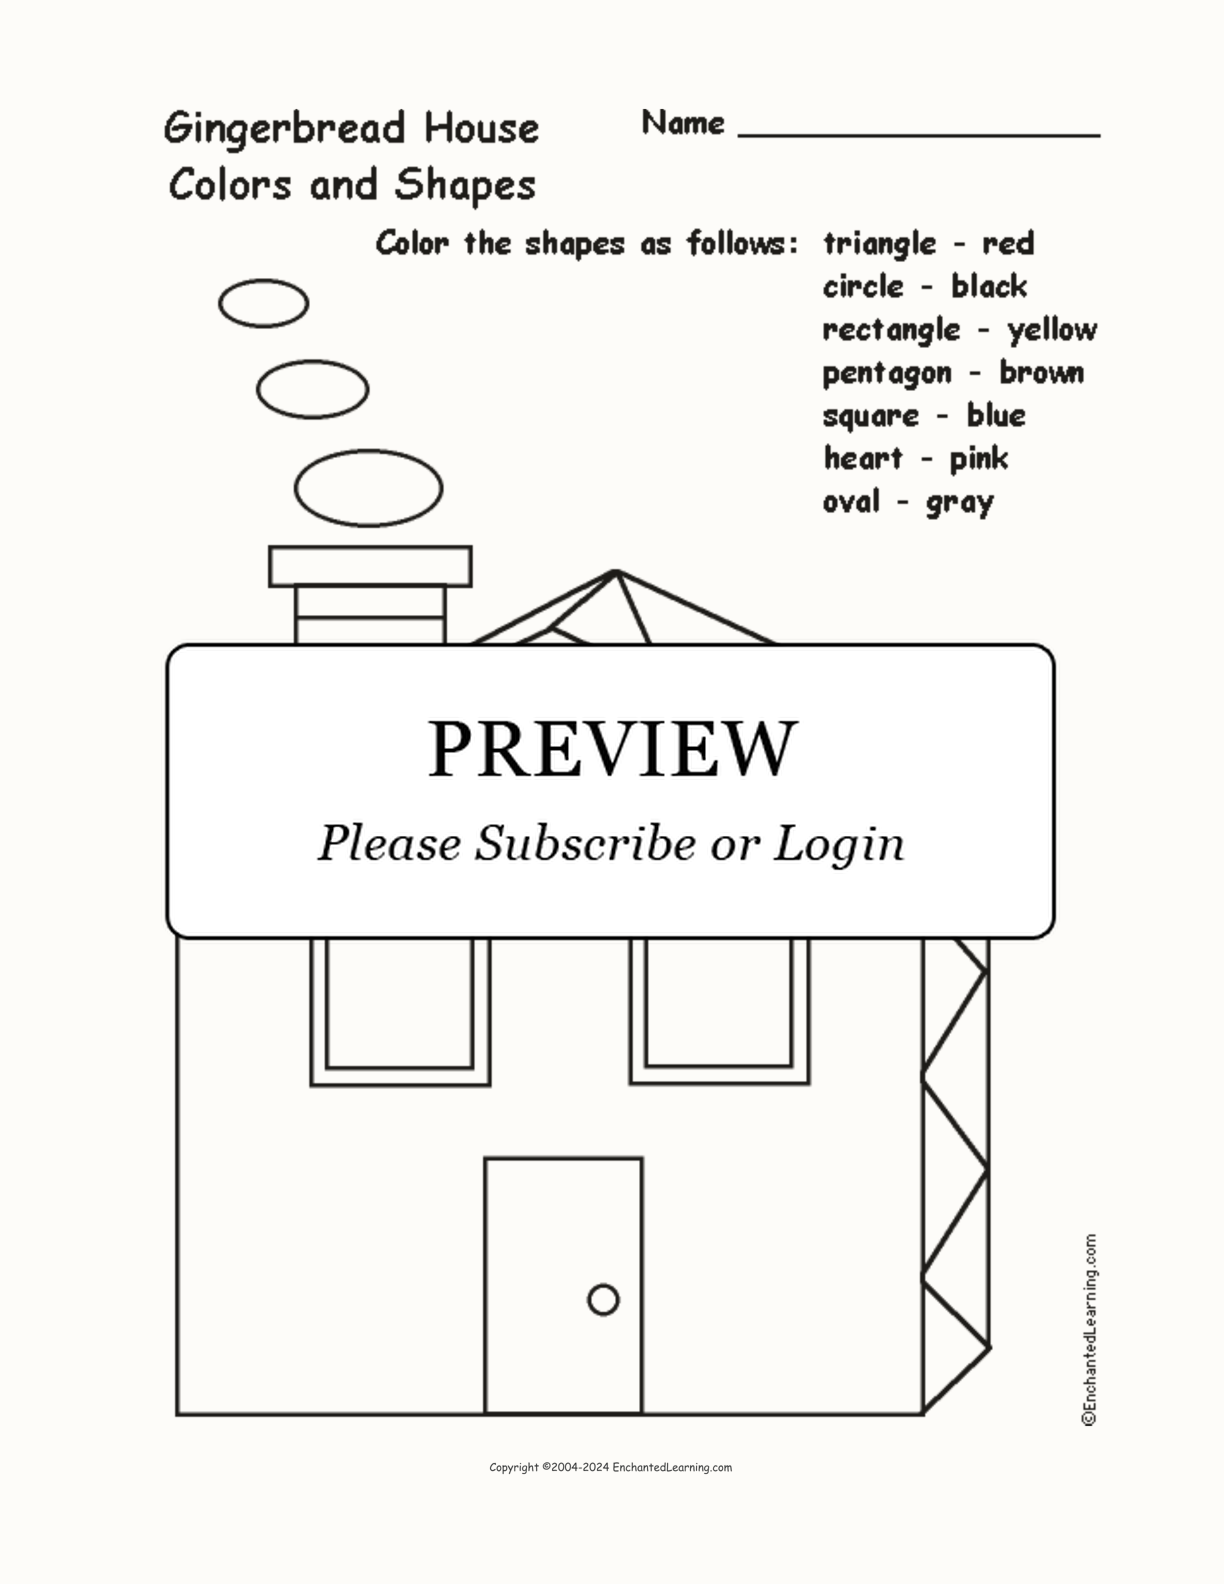 Gingerbread House: Colors and Shapes interactive worksheet page 1